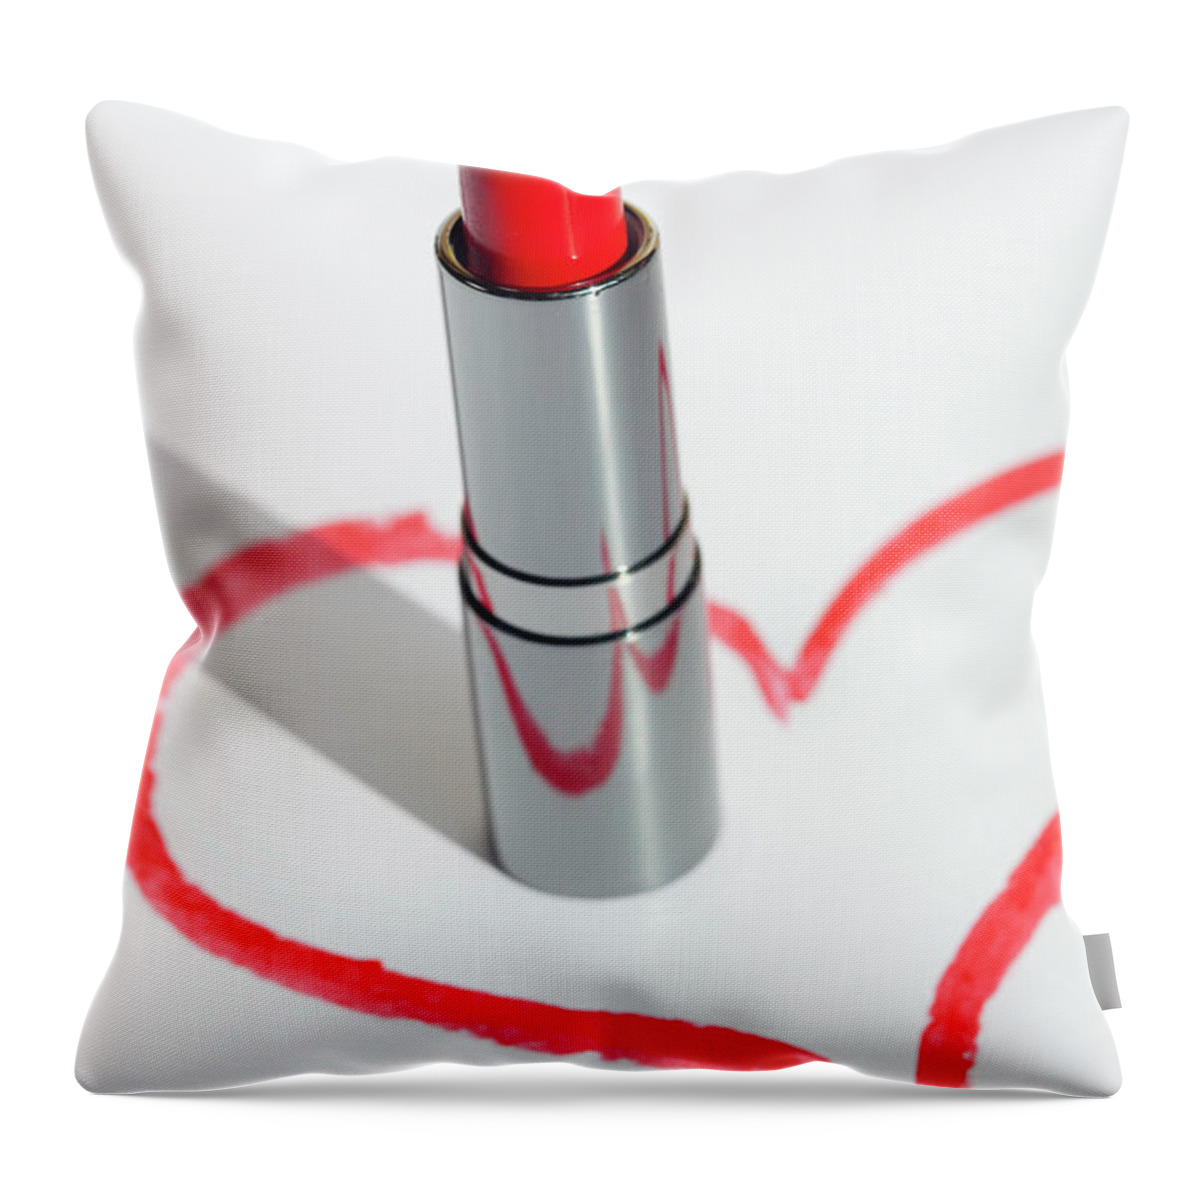 White Background Throw Pillow featuring the photograph A Lip-stick In A Drawn Heart Shape On by Reggie Casagrande